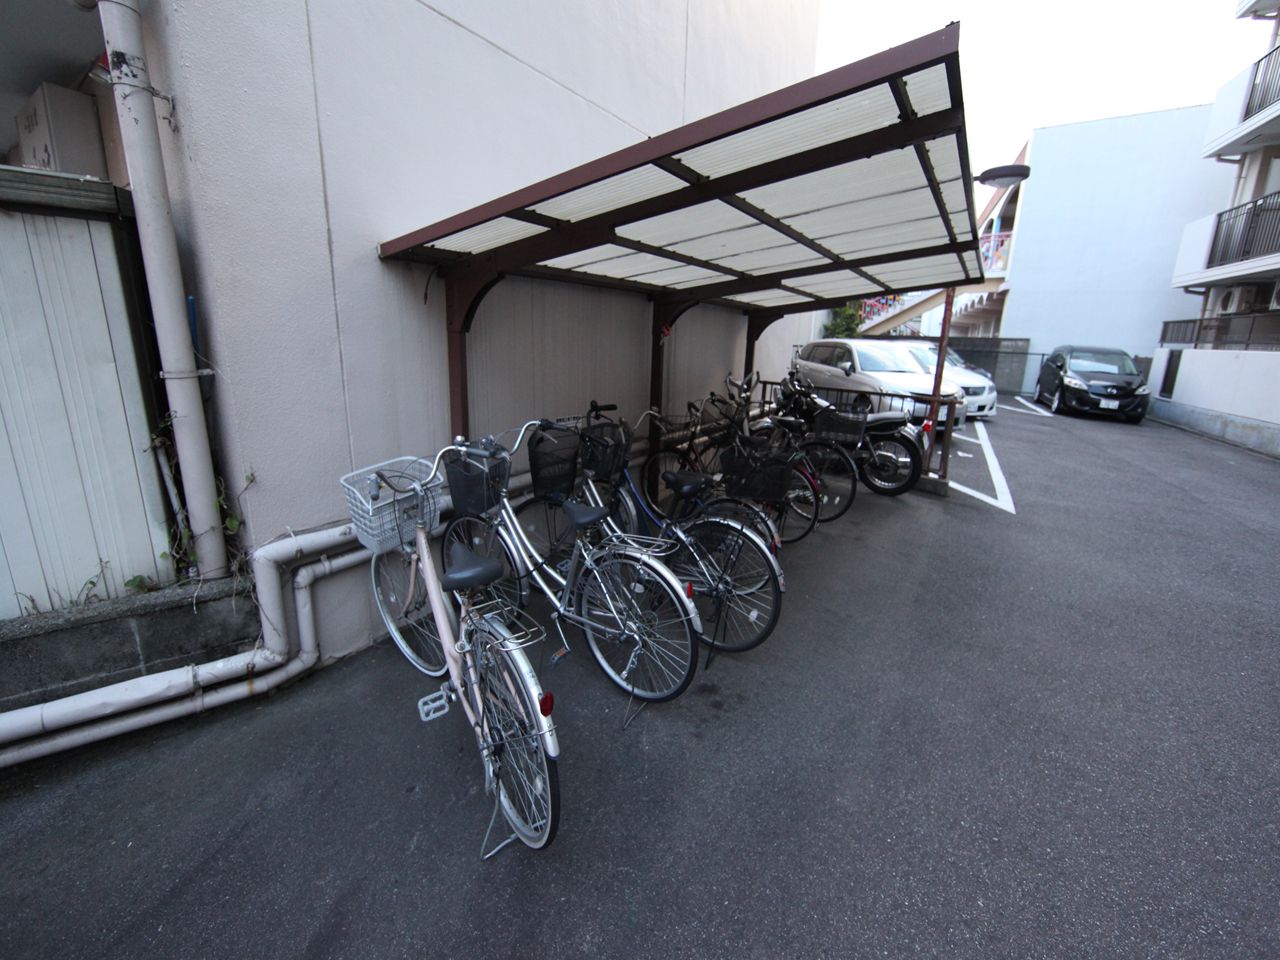 Other common areas. On-site bicycle parking lot